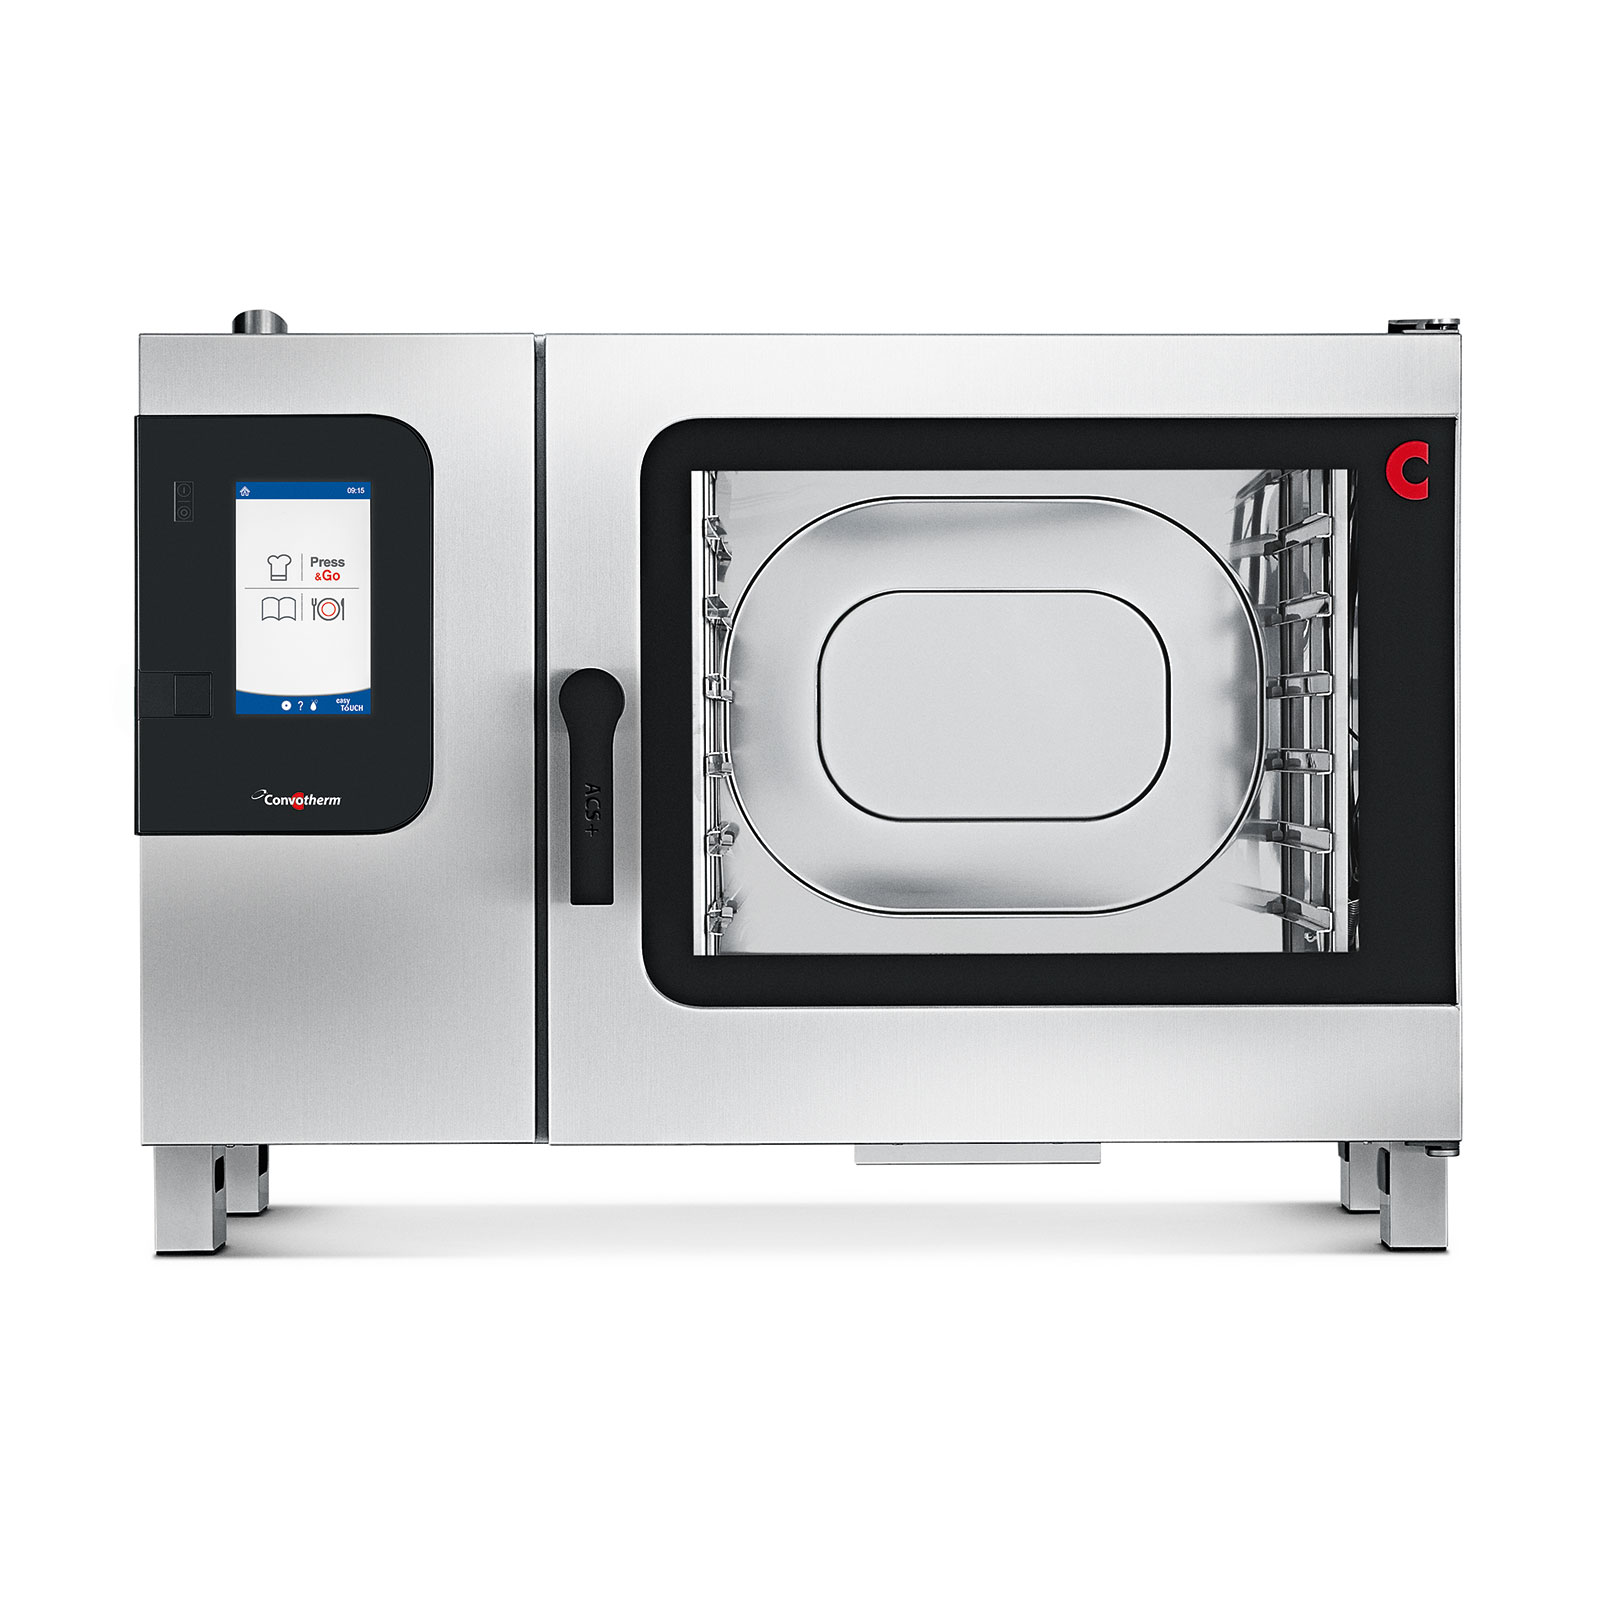 Convotherm C4ET6.20EB DD Full-Size Electric Combi Oven w/ Programmable Controls, Steam Generator, 440-480v